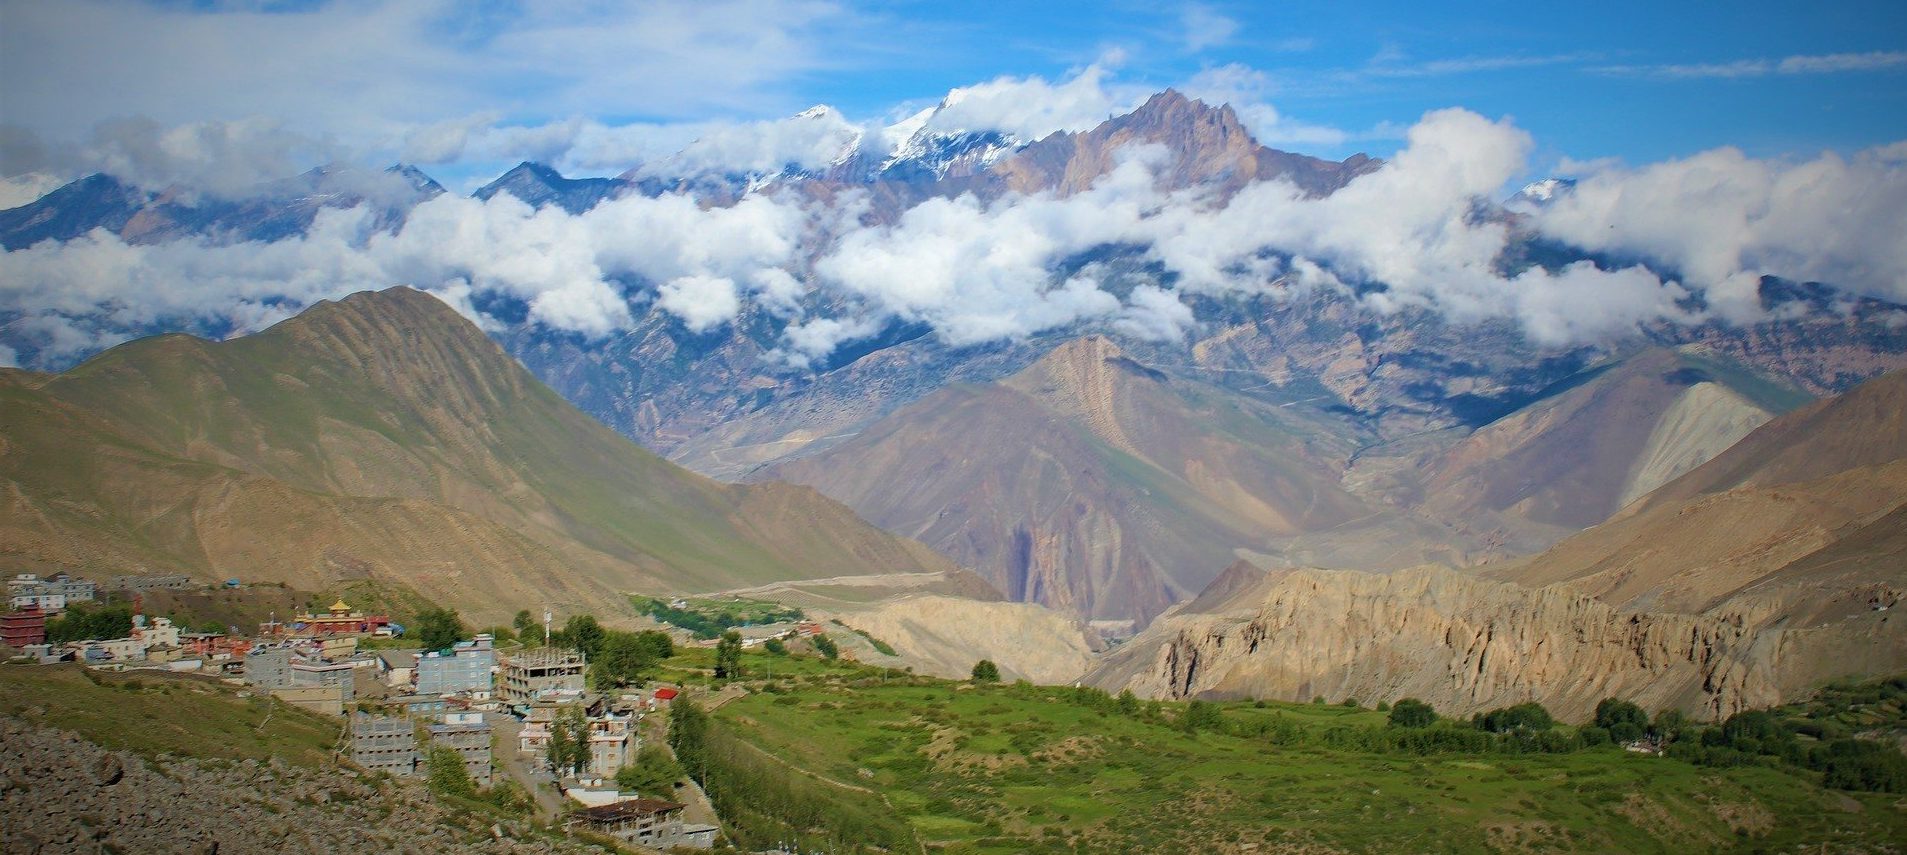 a scenic view captured from muktinath during mustang tiji festival trek